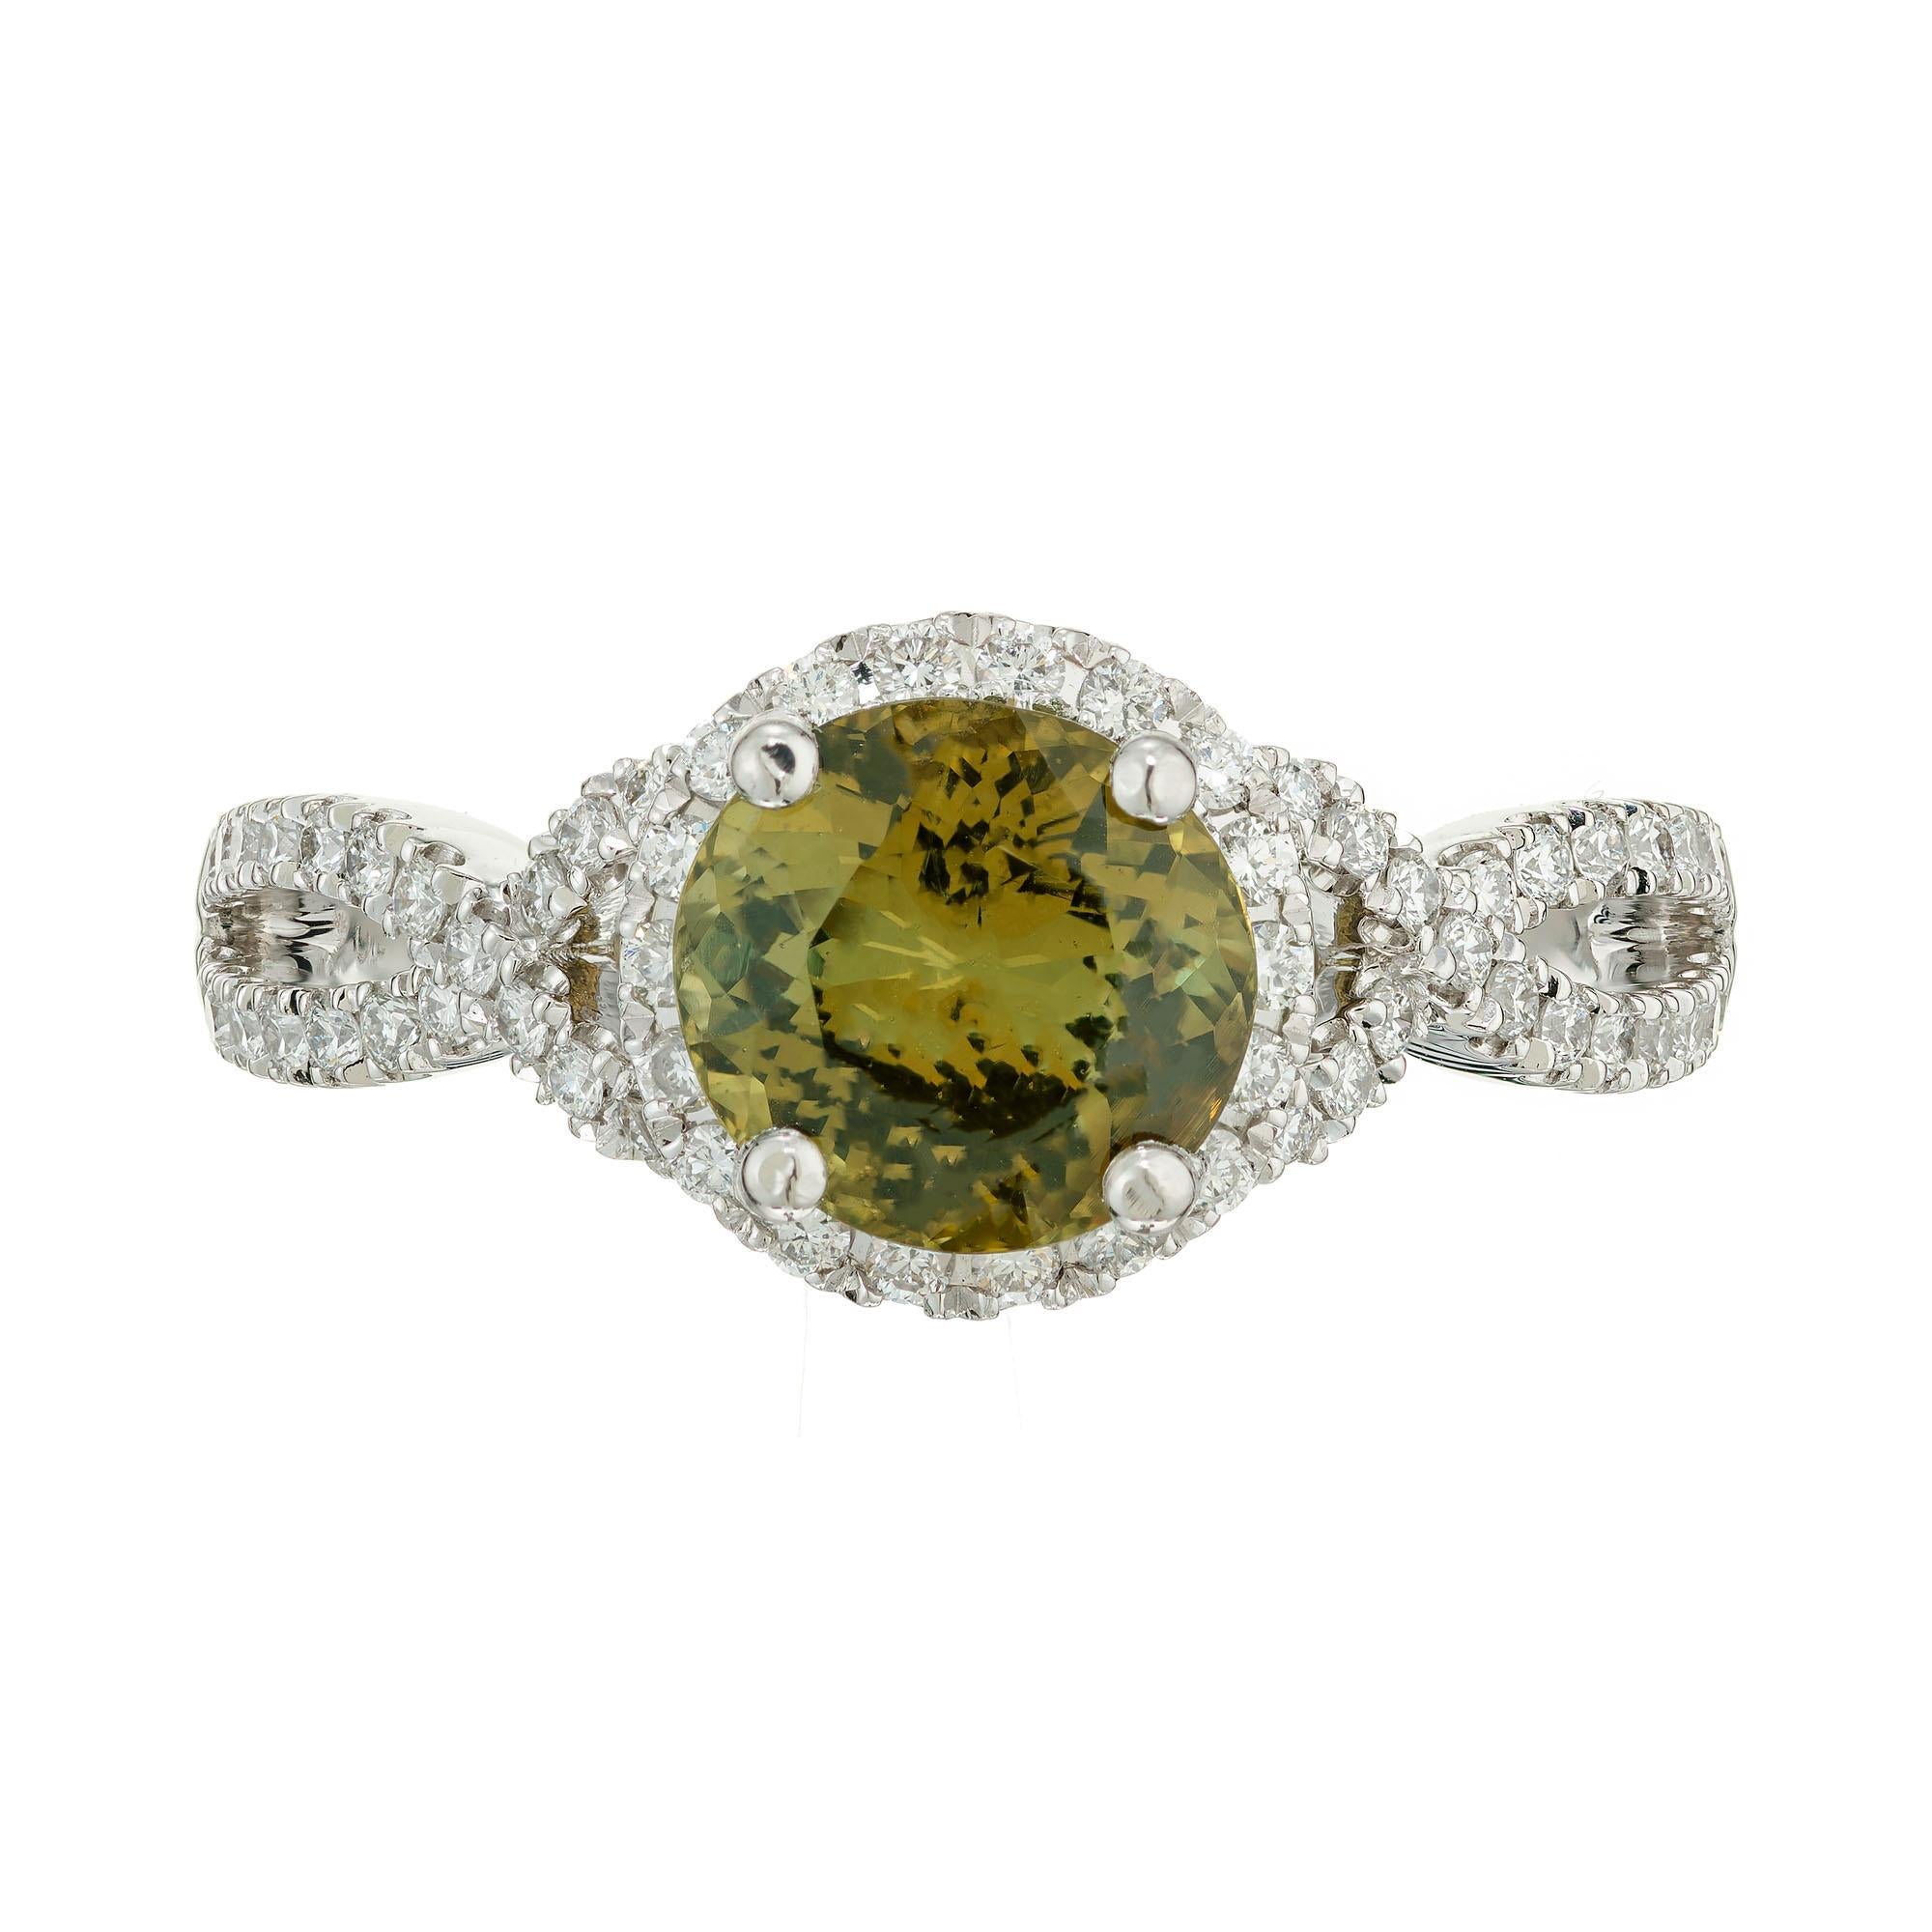 Alexandrite and diamond halo engagement ring. GIA certified natural 2.08 carat round greenish yellow color change Alexandrite center stone, in a platinum setting with a diamond halo and split shank accented with diamonds. Created in the Peter Suchy.